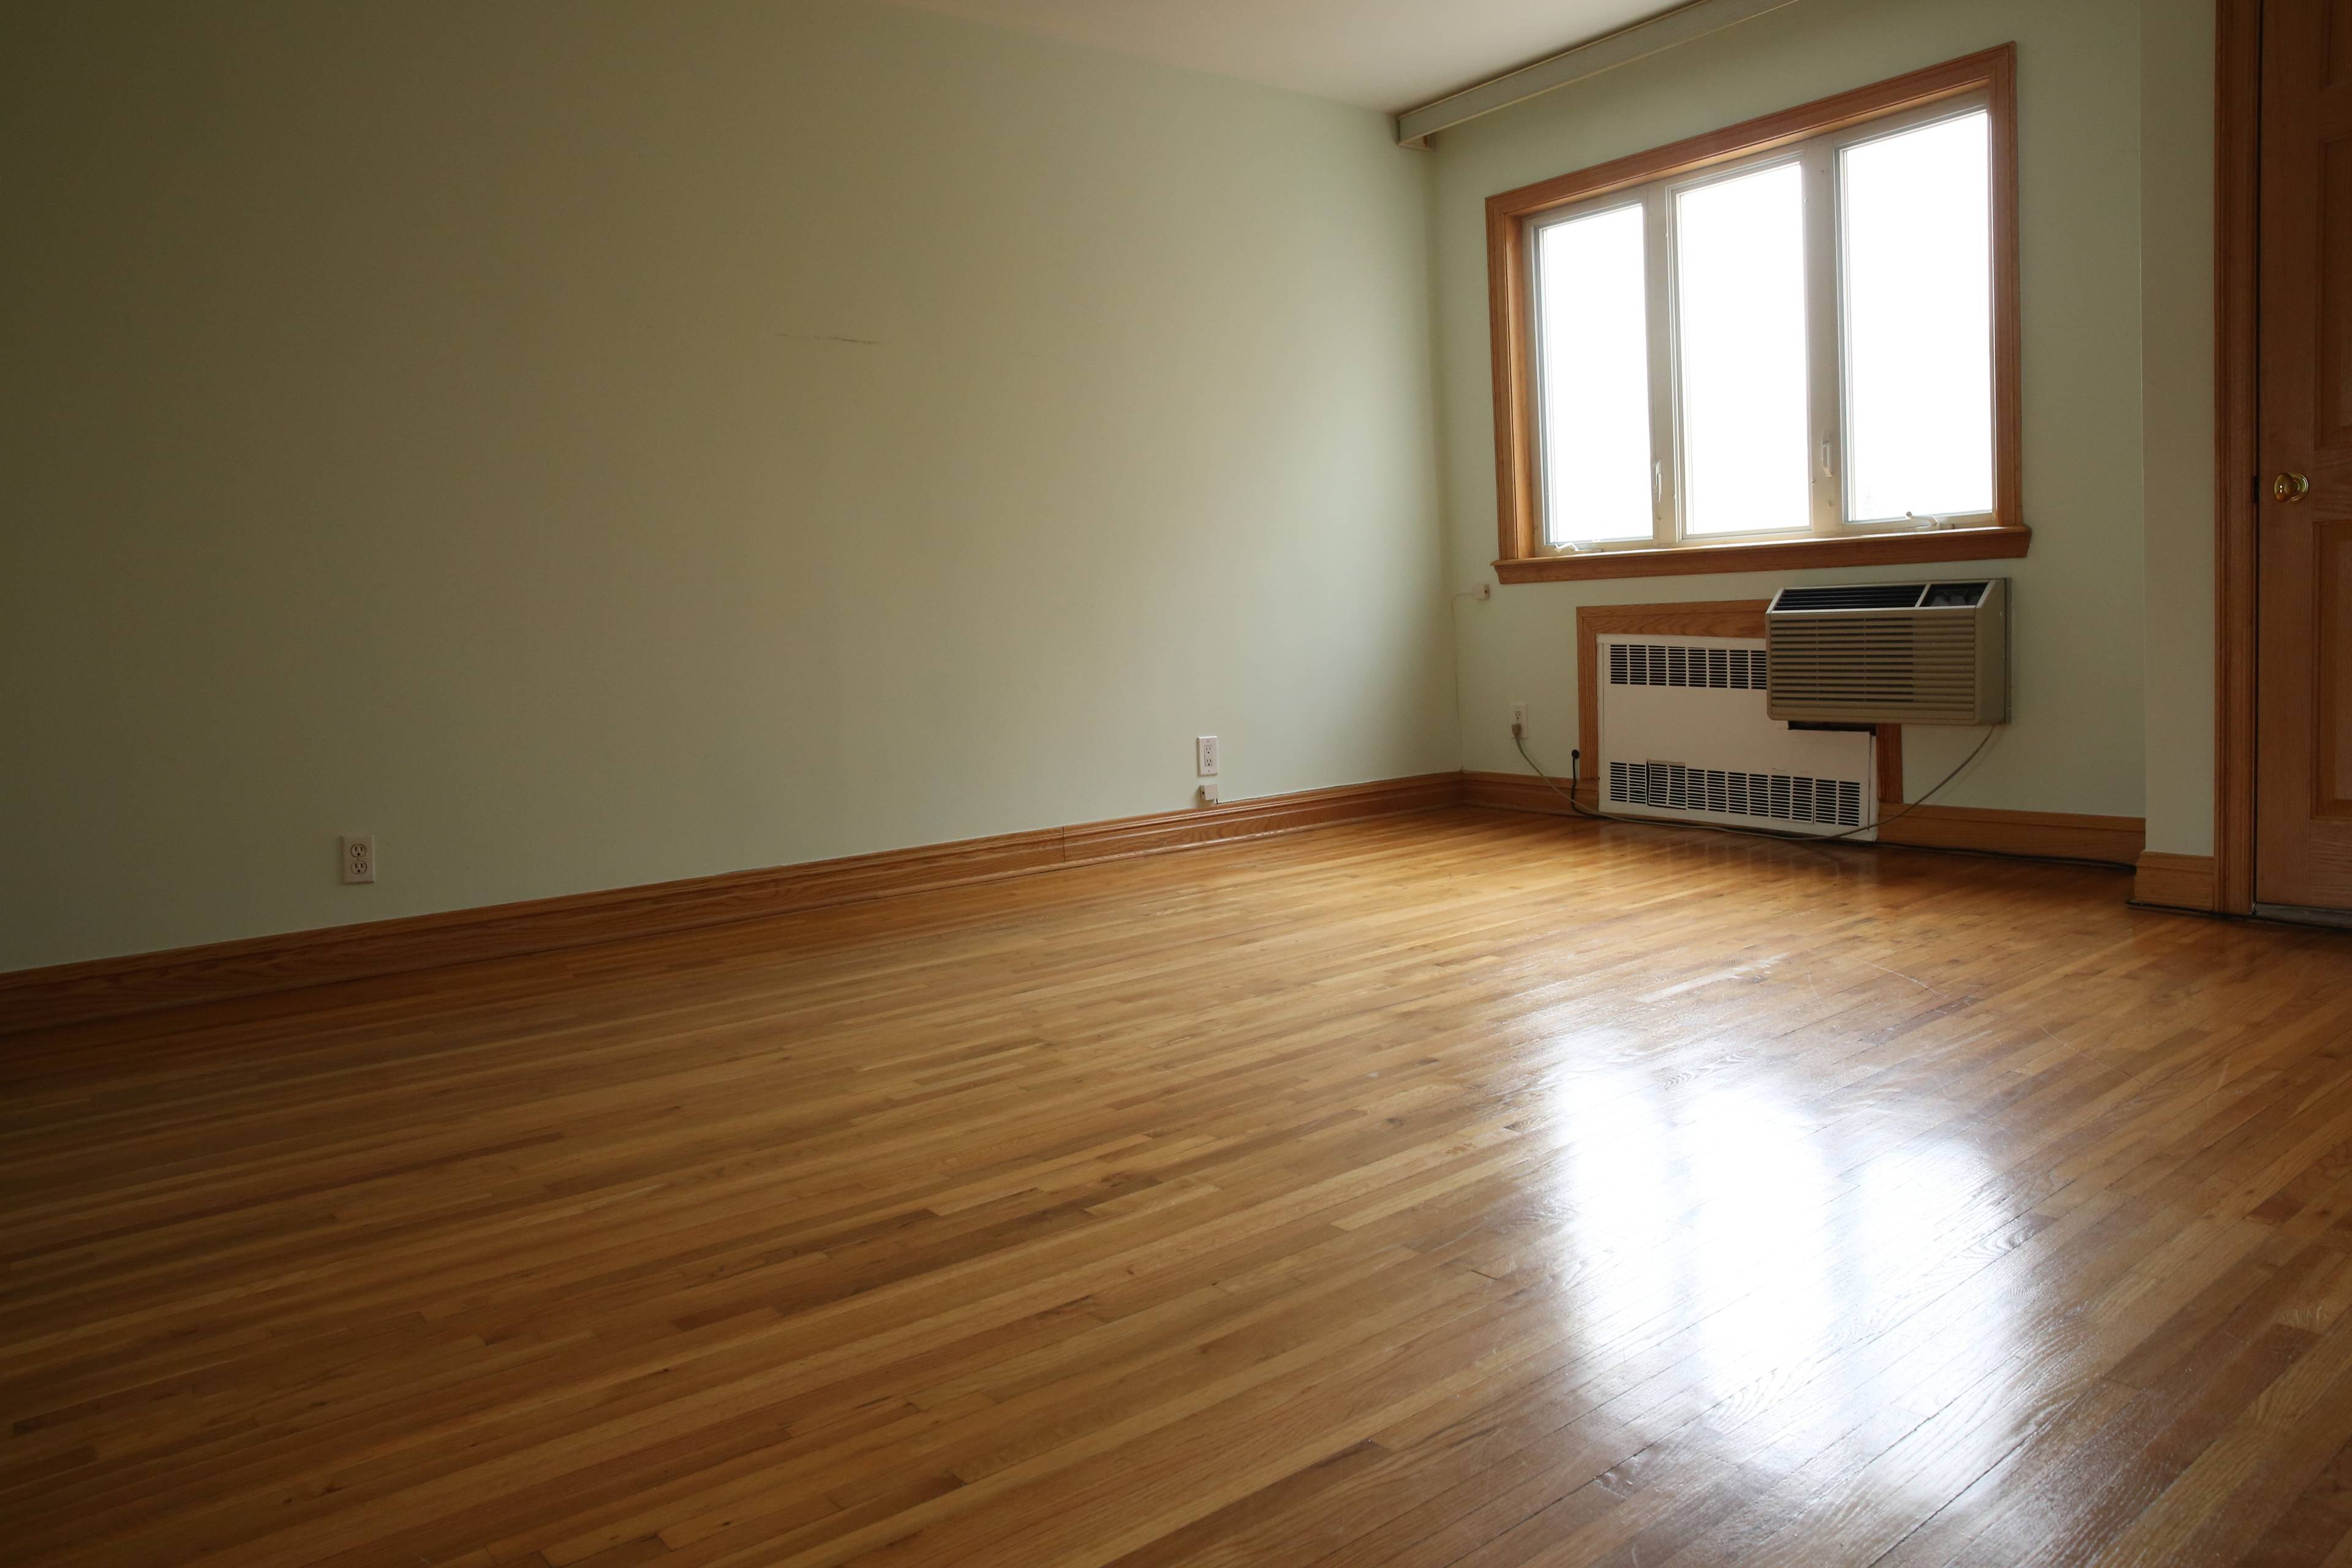 Renovated and Spacious 4bd/4ba Multi- Family in Rego Park!